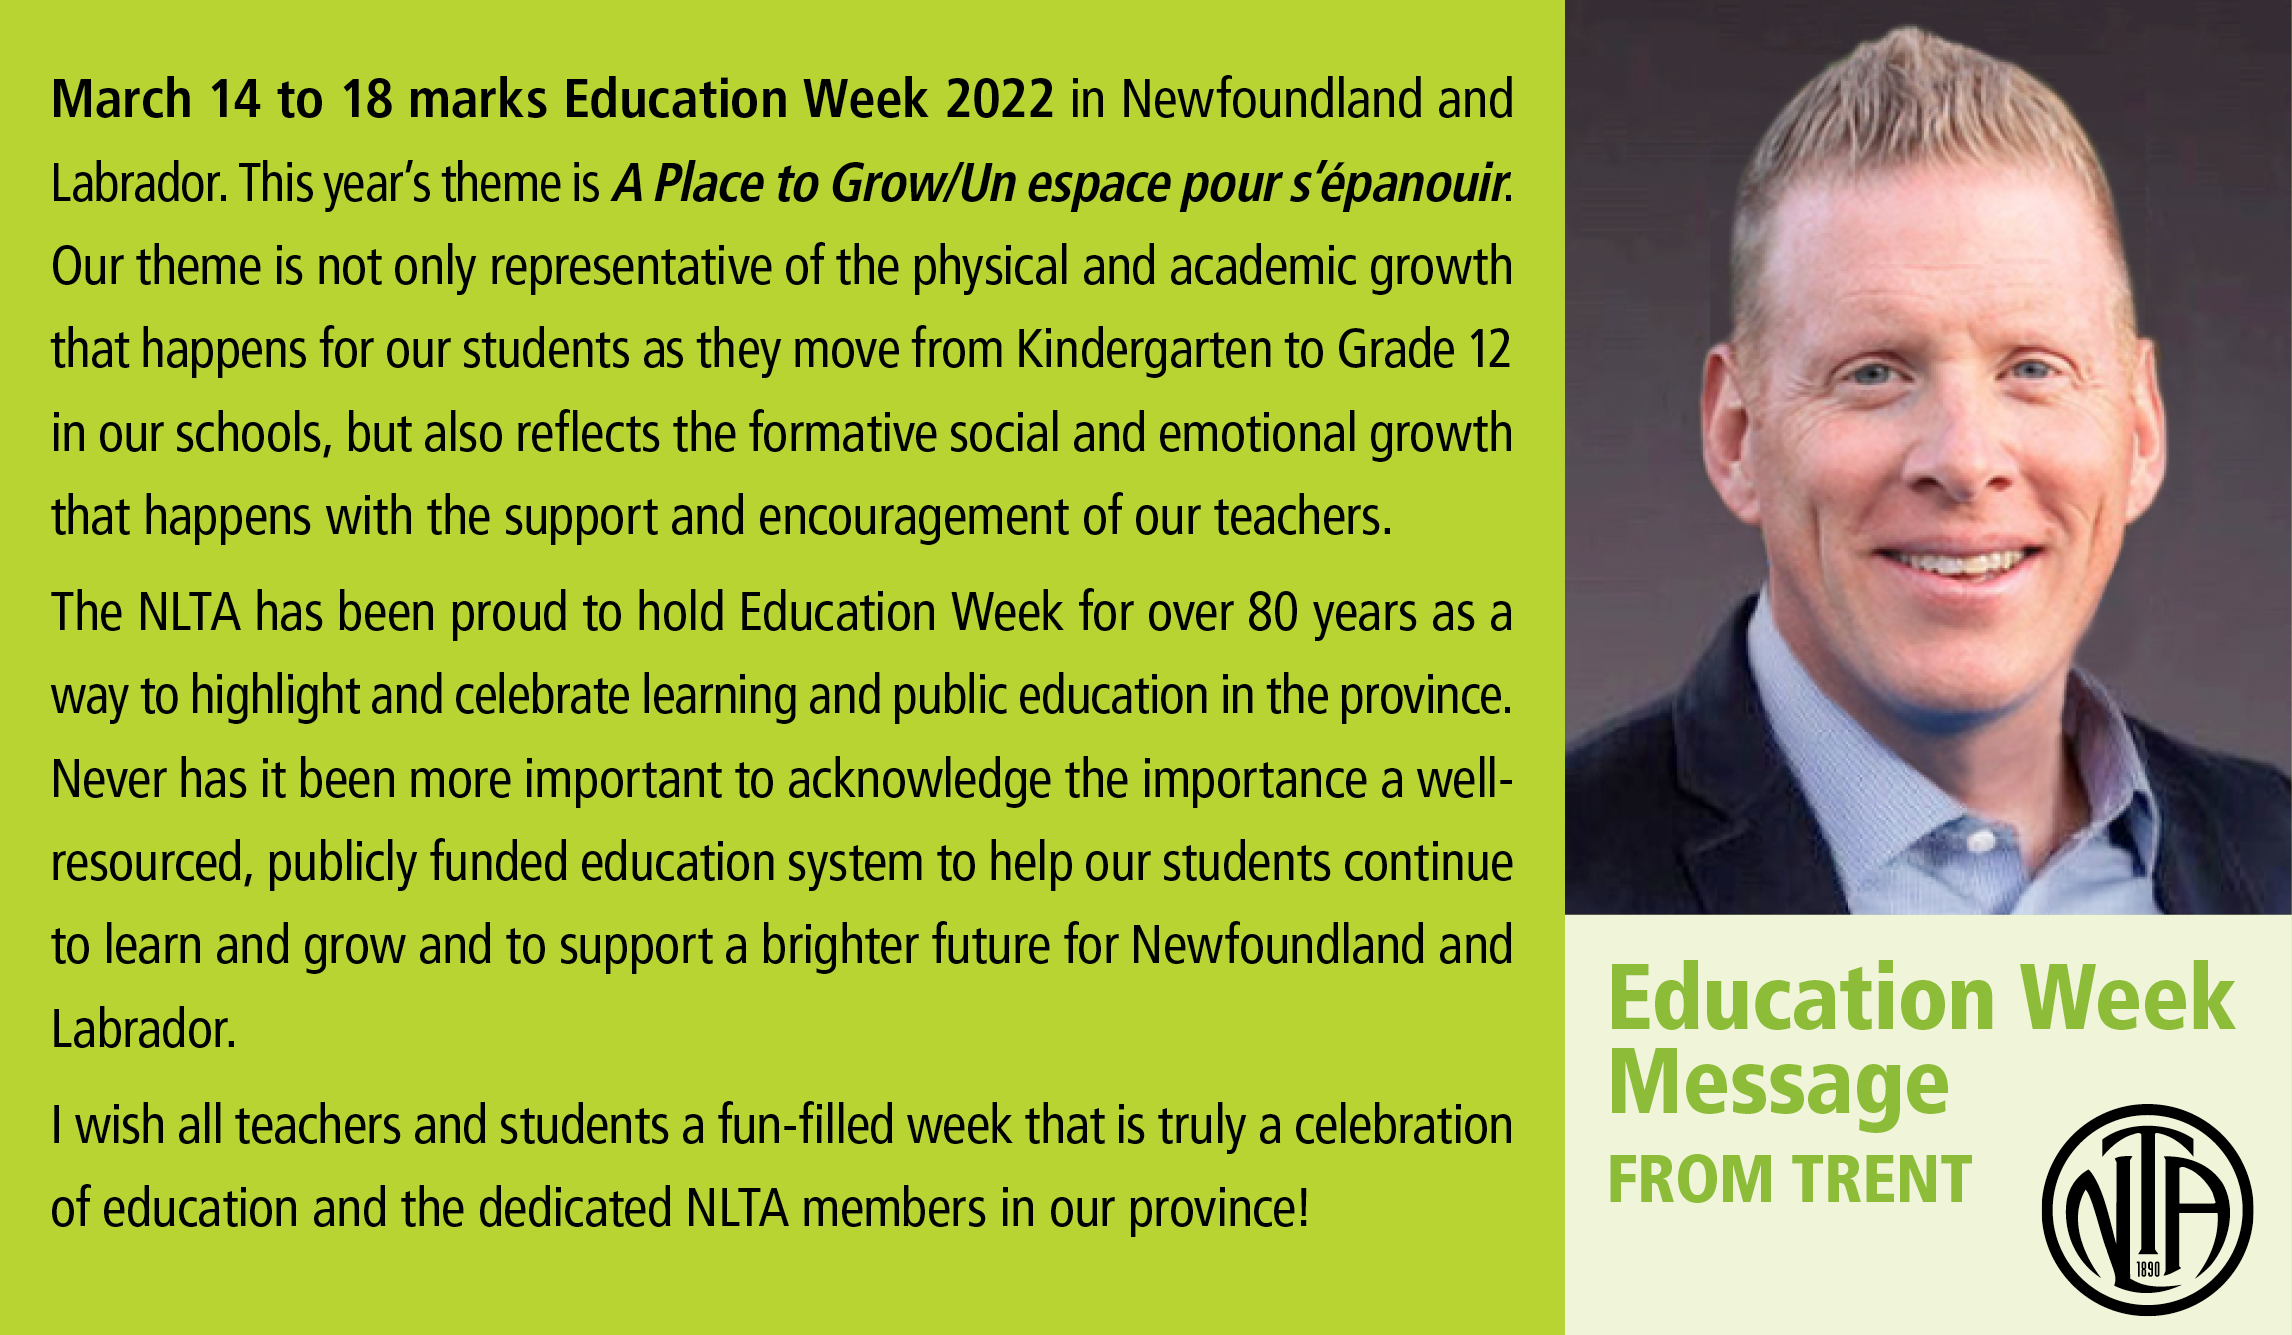 EdWeek2022 Message from Trent